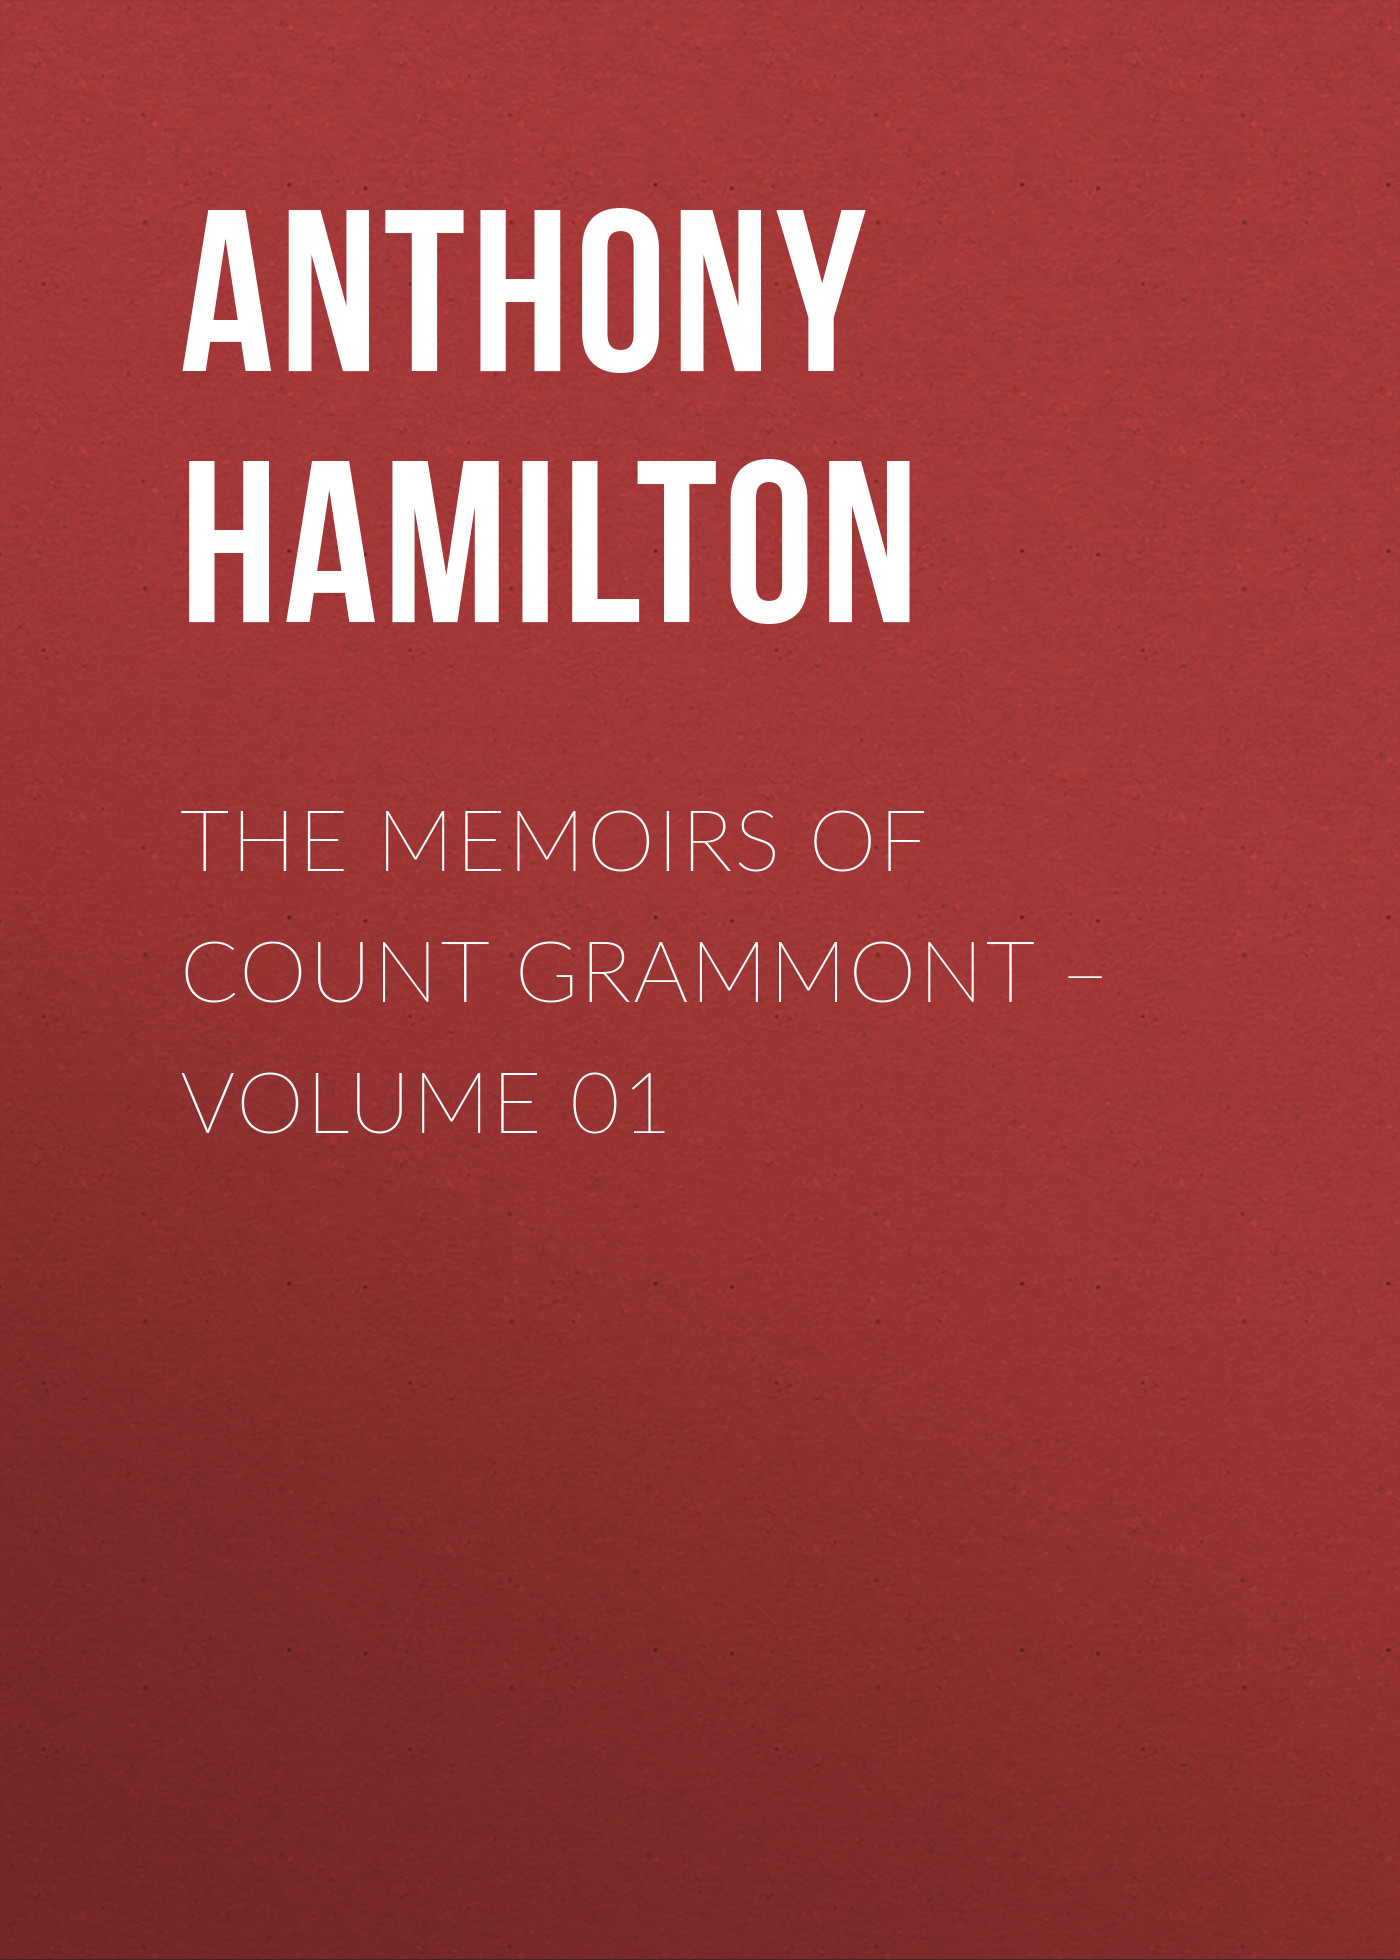 The Memoirs of Count Grammont– Volume 01